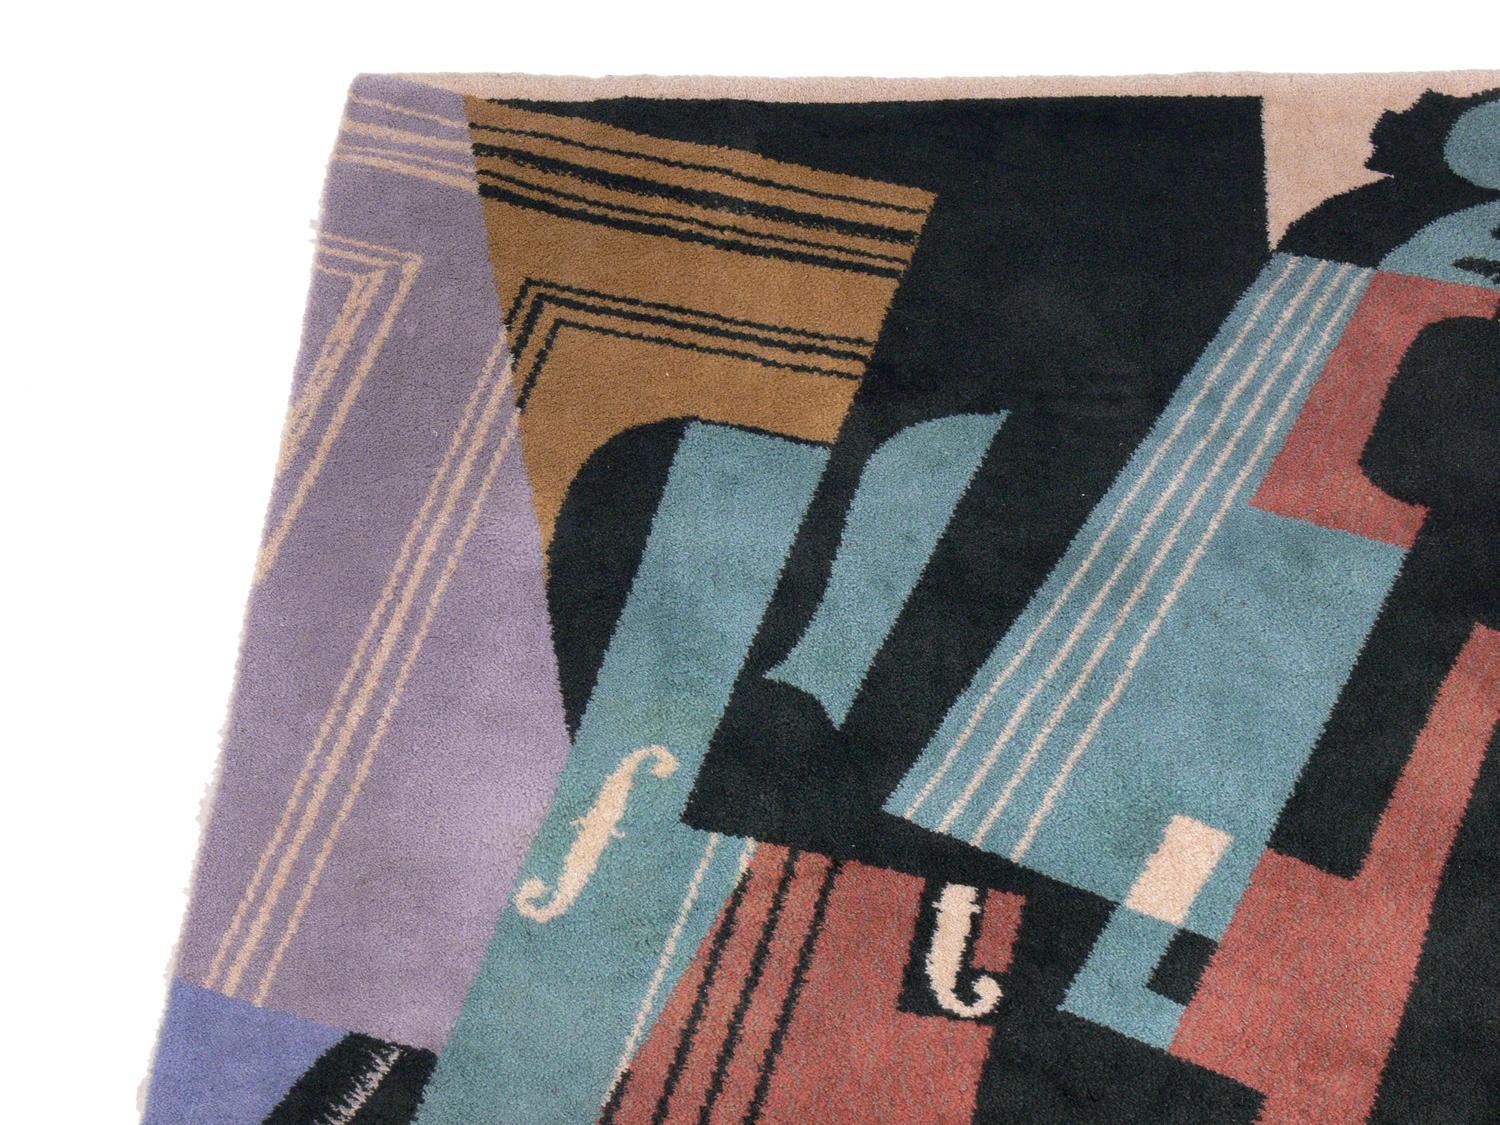 Vibrant cubist carpet or tapestry, based on a 1916 painting by Juan Gris, made by Ege Axminster A/S Art Line, Denmark, circa 1990s. Juan Gris signature woven in lower left hand corner of rug. It measures an impressive 71